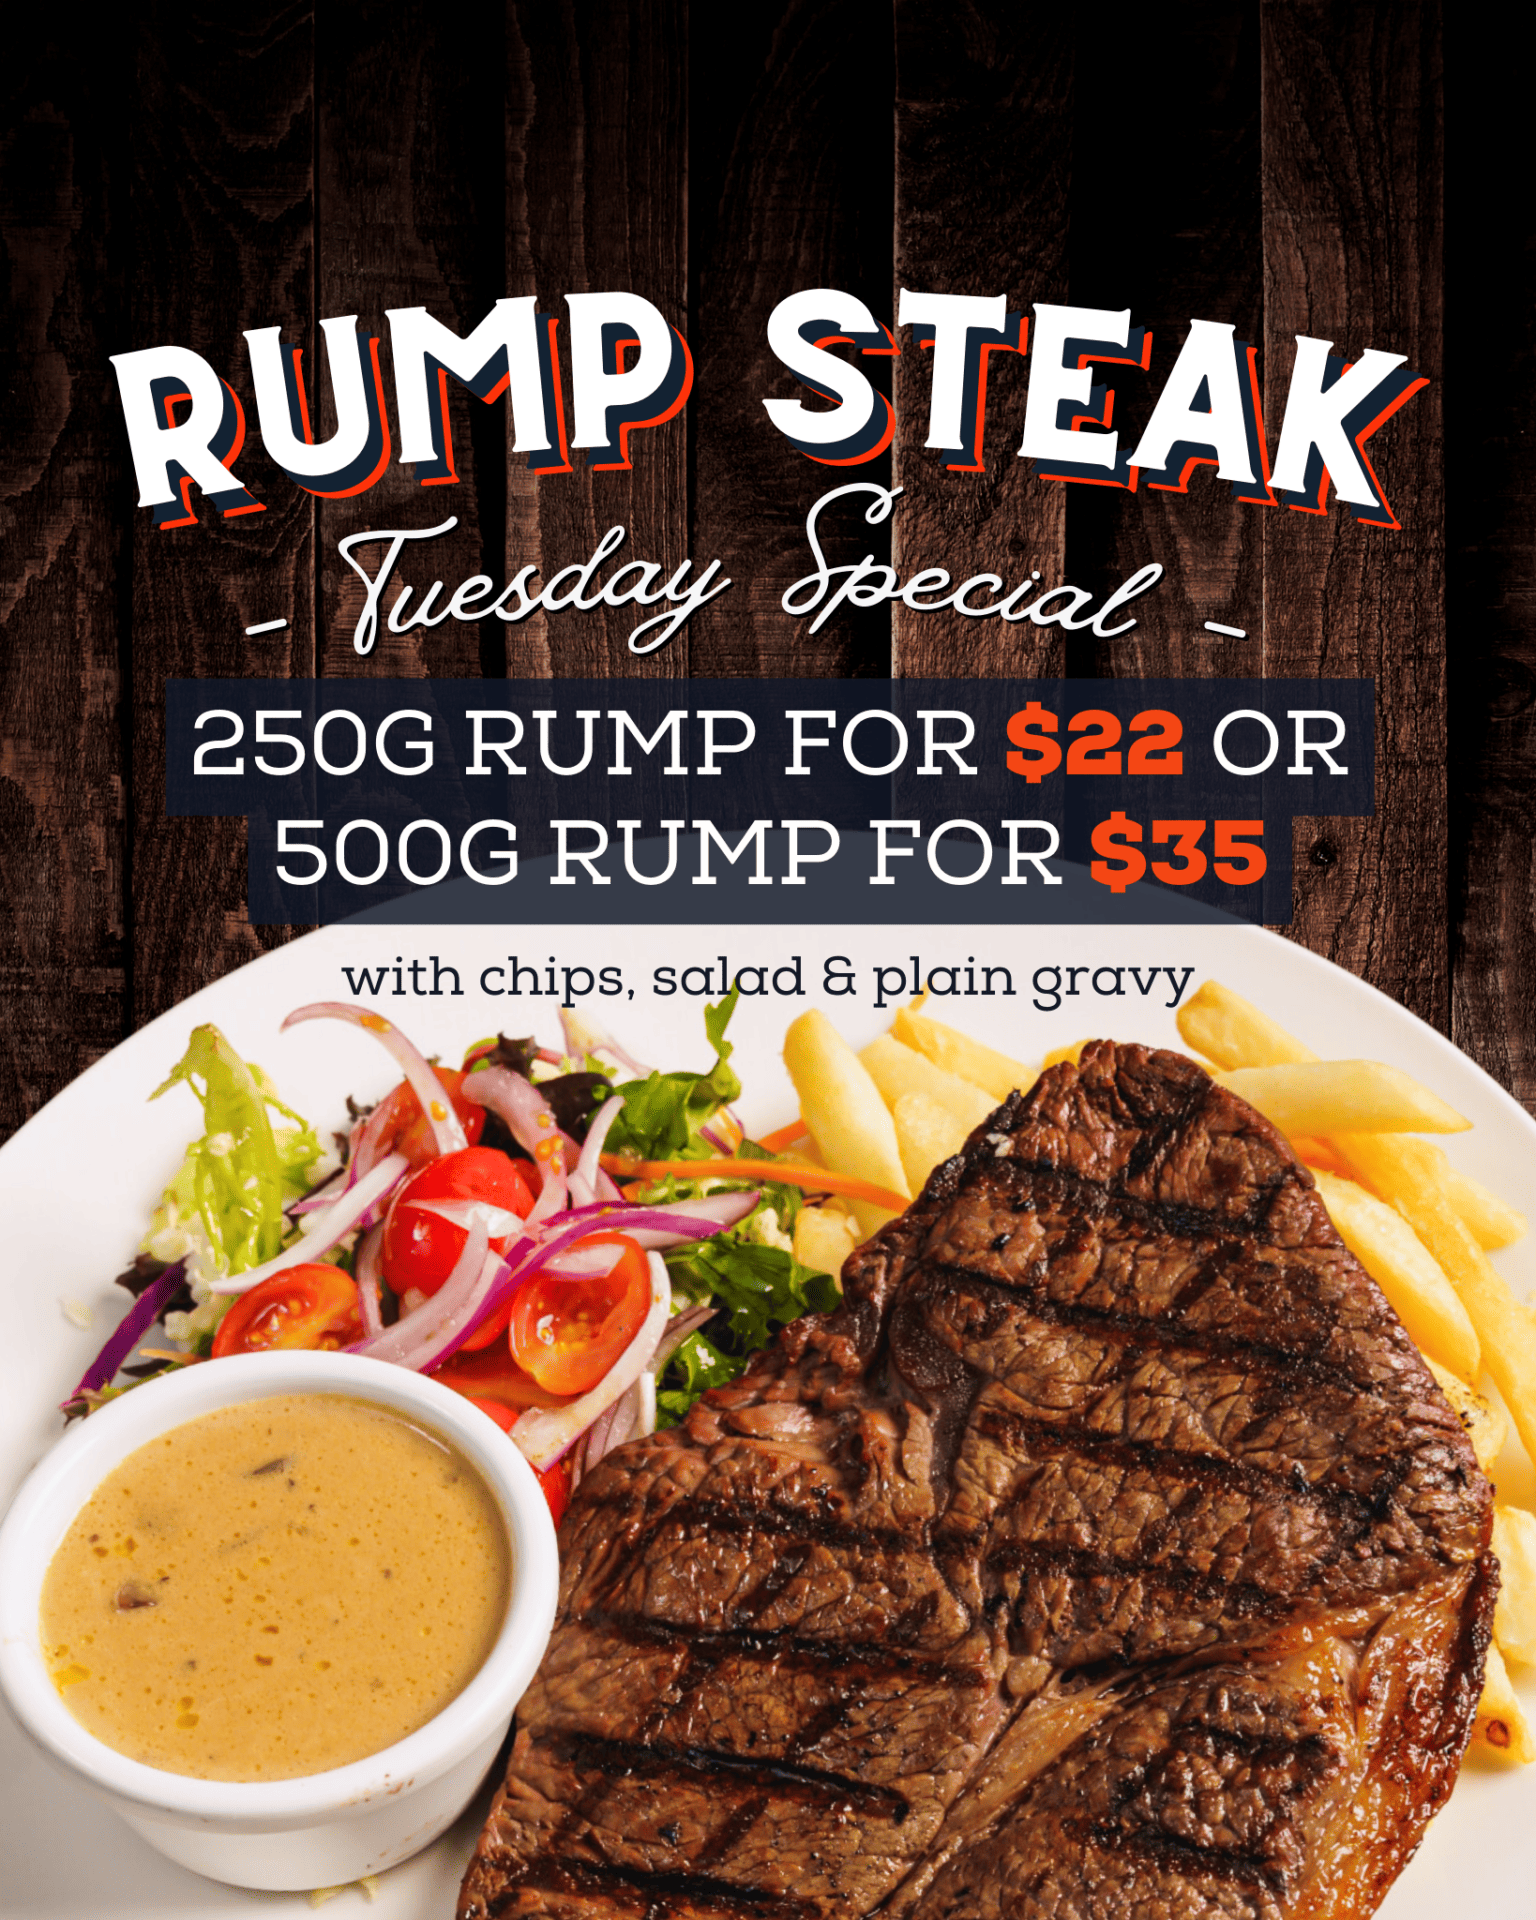 Tuesday Special - Rump Steak at the Kalka Palms Hotel